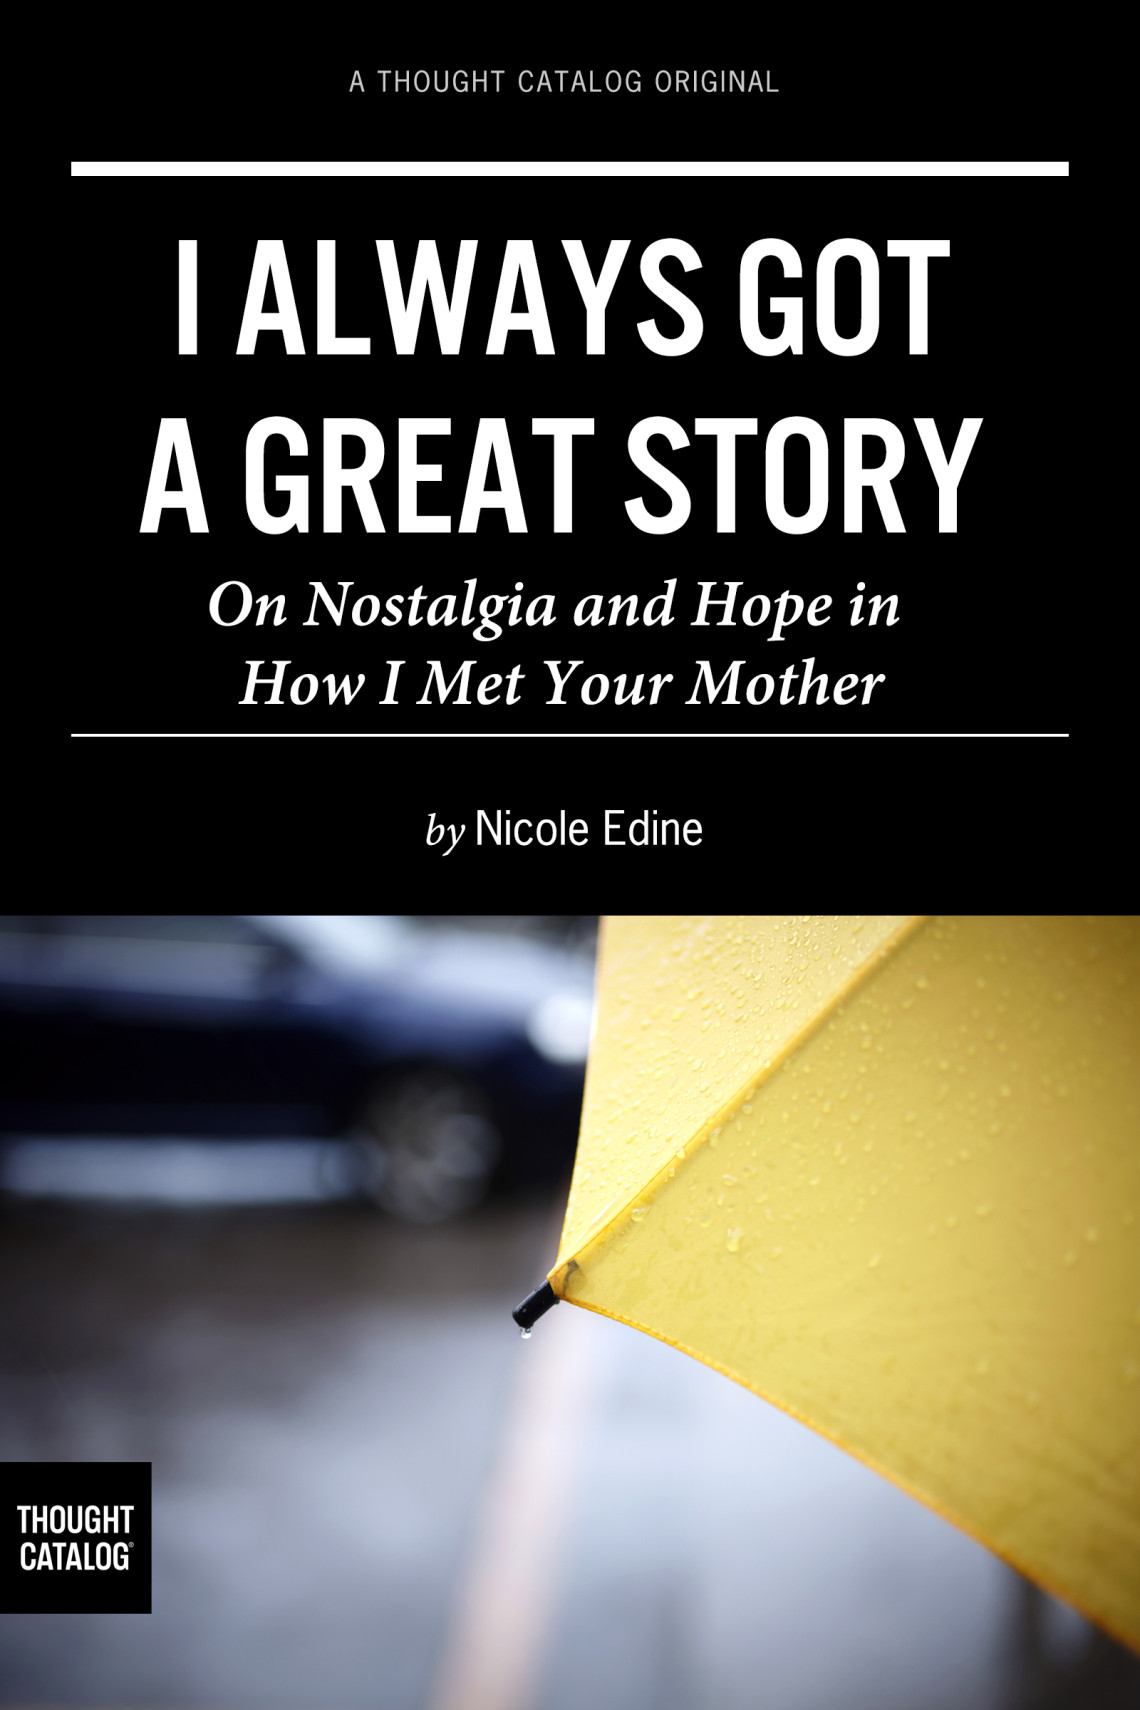 Quotes About Your Mother
 10 ‘How I Met Your Mother’ Quotes We Can All Relate To